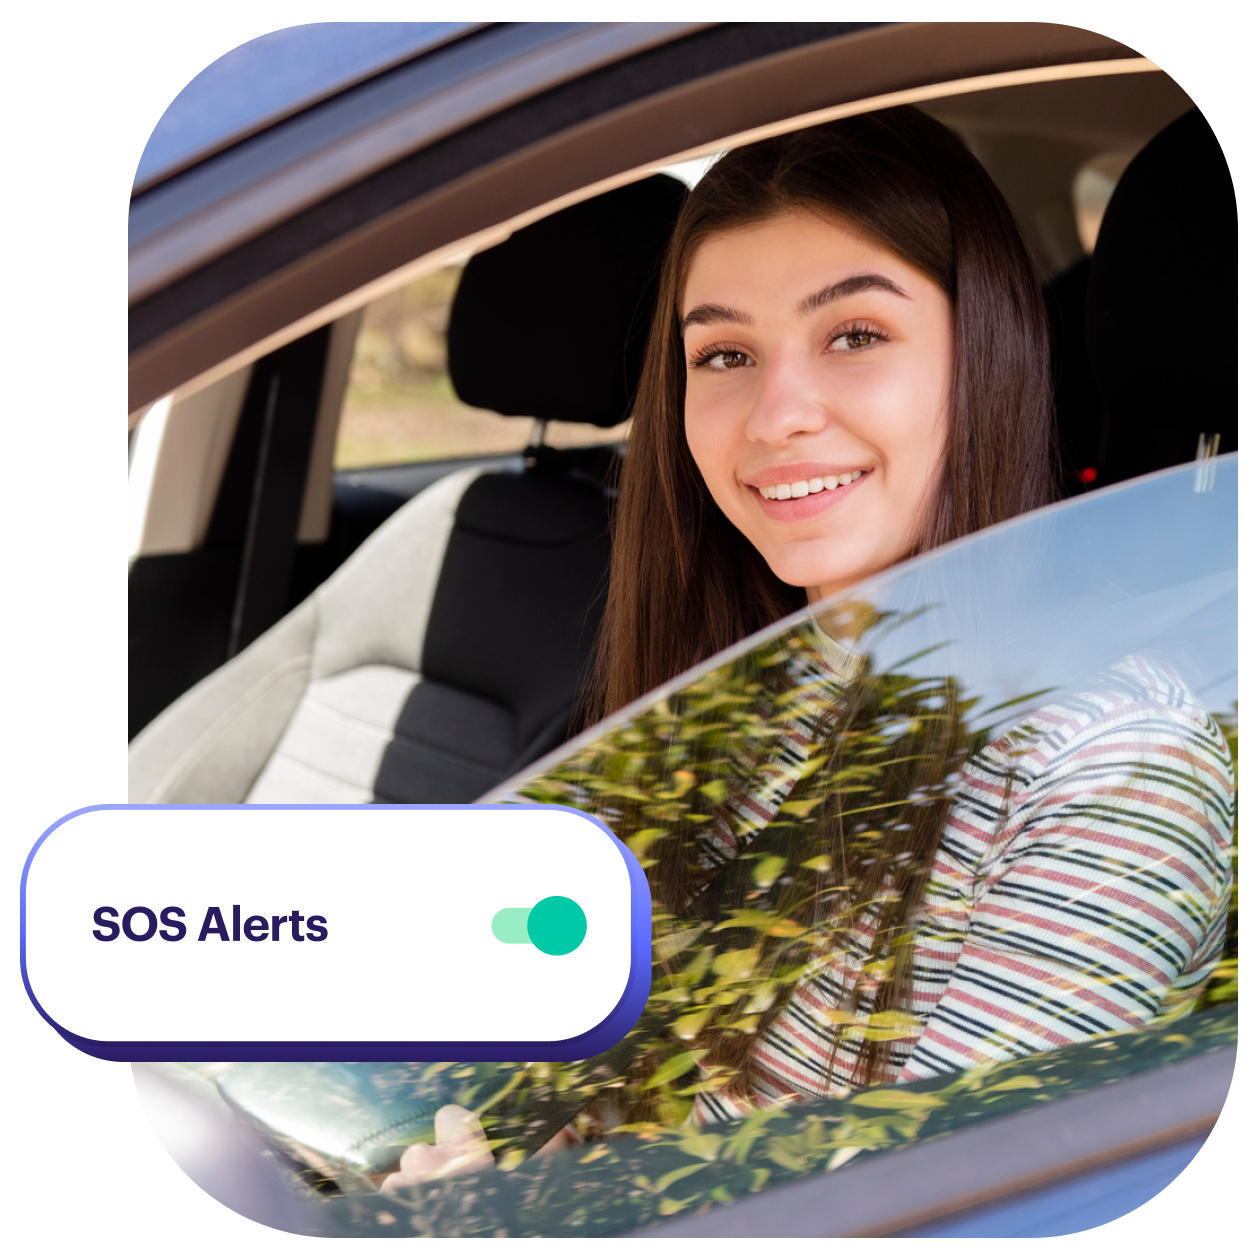 Kids and teens use Greenlight for SOS alerts